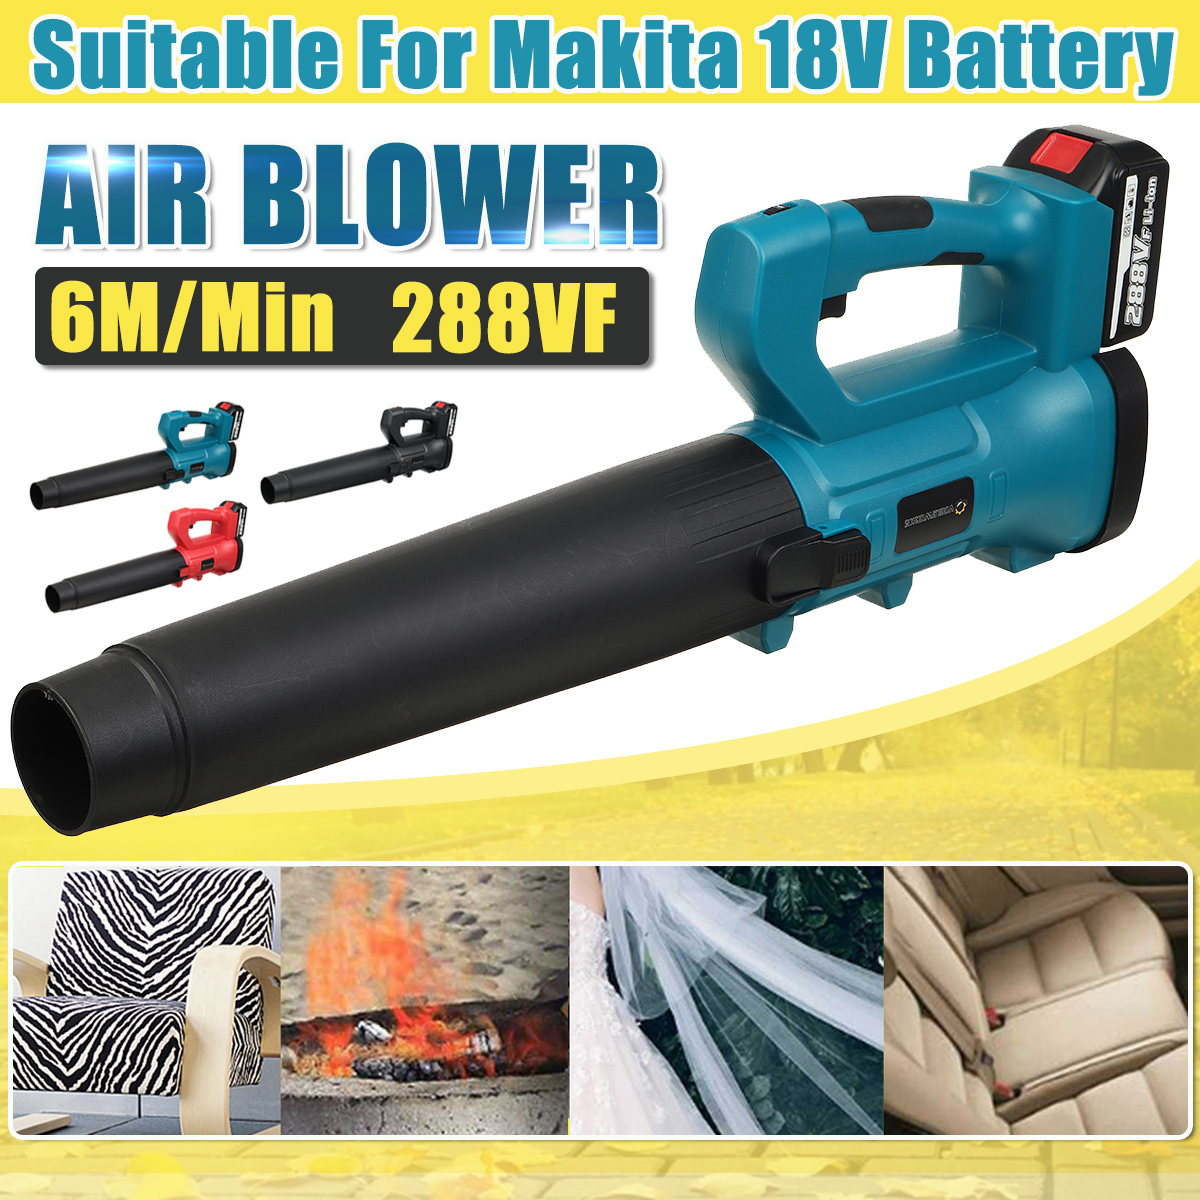 288VF-18000RPM-Cordless-Electric-Air-Blower-Vacuum-Cleannig-Dust-Blowing-Dust-Collector-Leaf-Blower--1849707-1